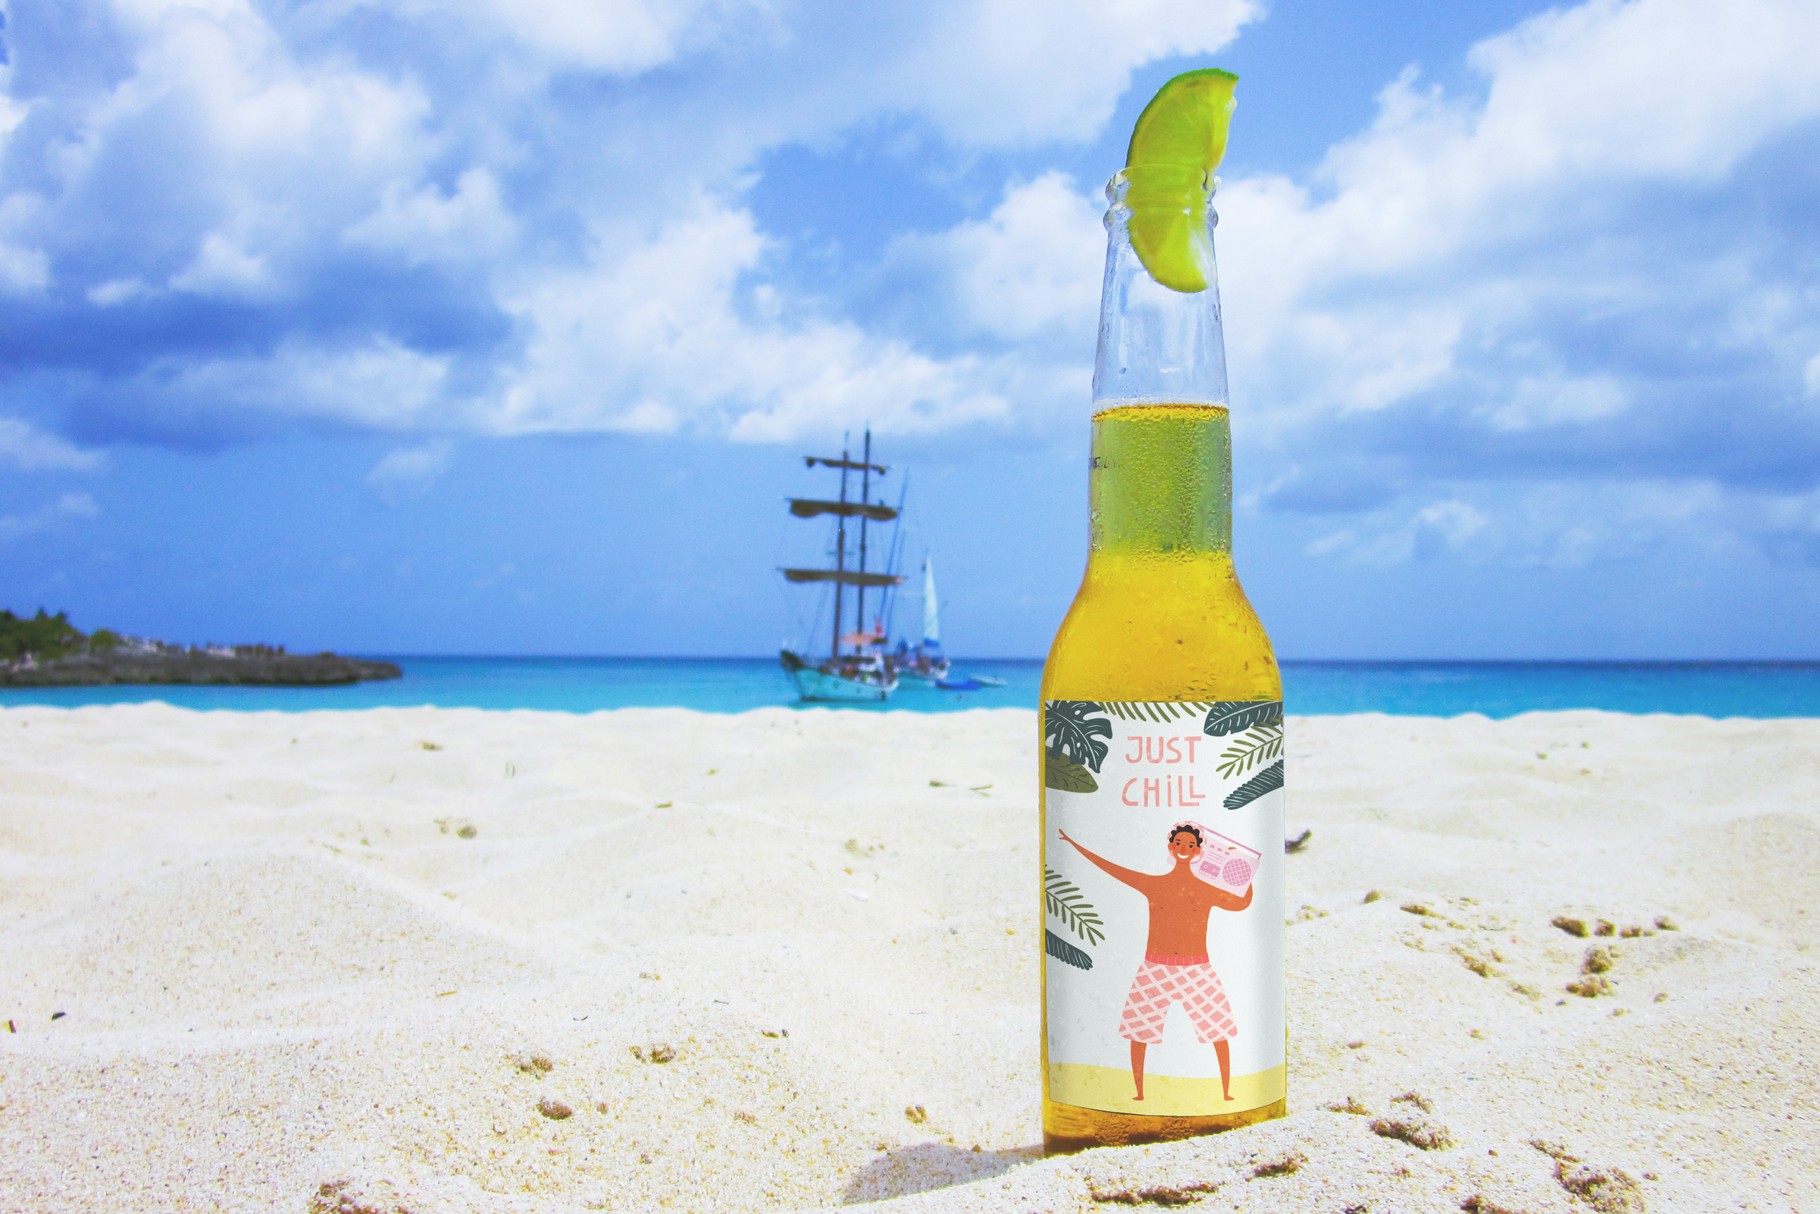 Print on a bottle on a background of the sea and a sailboat.